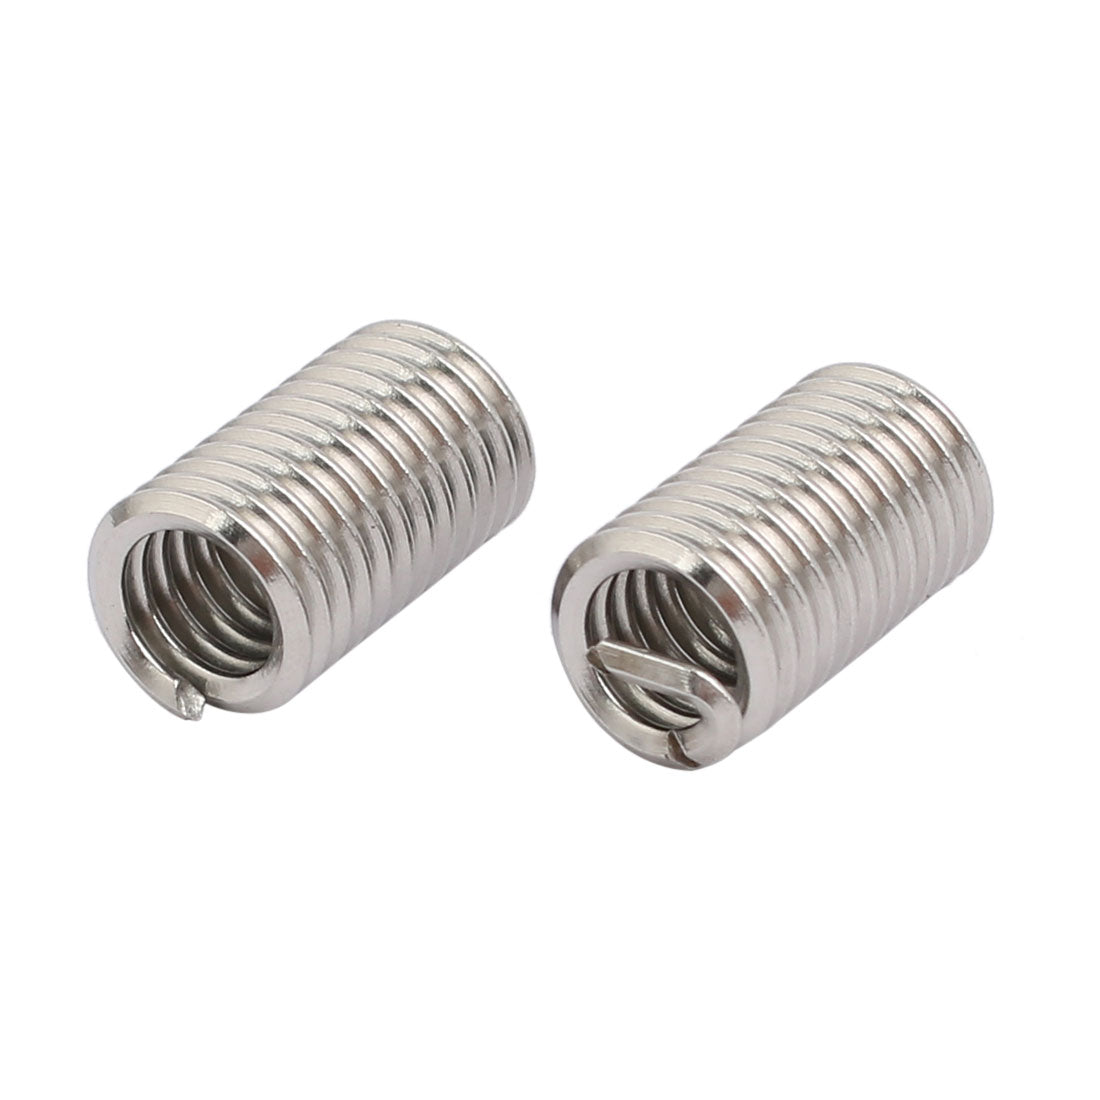 uxcell Uxcell 1/4-20x0.75" 304 Stainless Steel Helical Coil Wire Thread Insert 25pcs